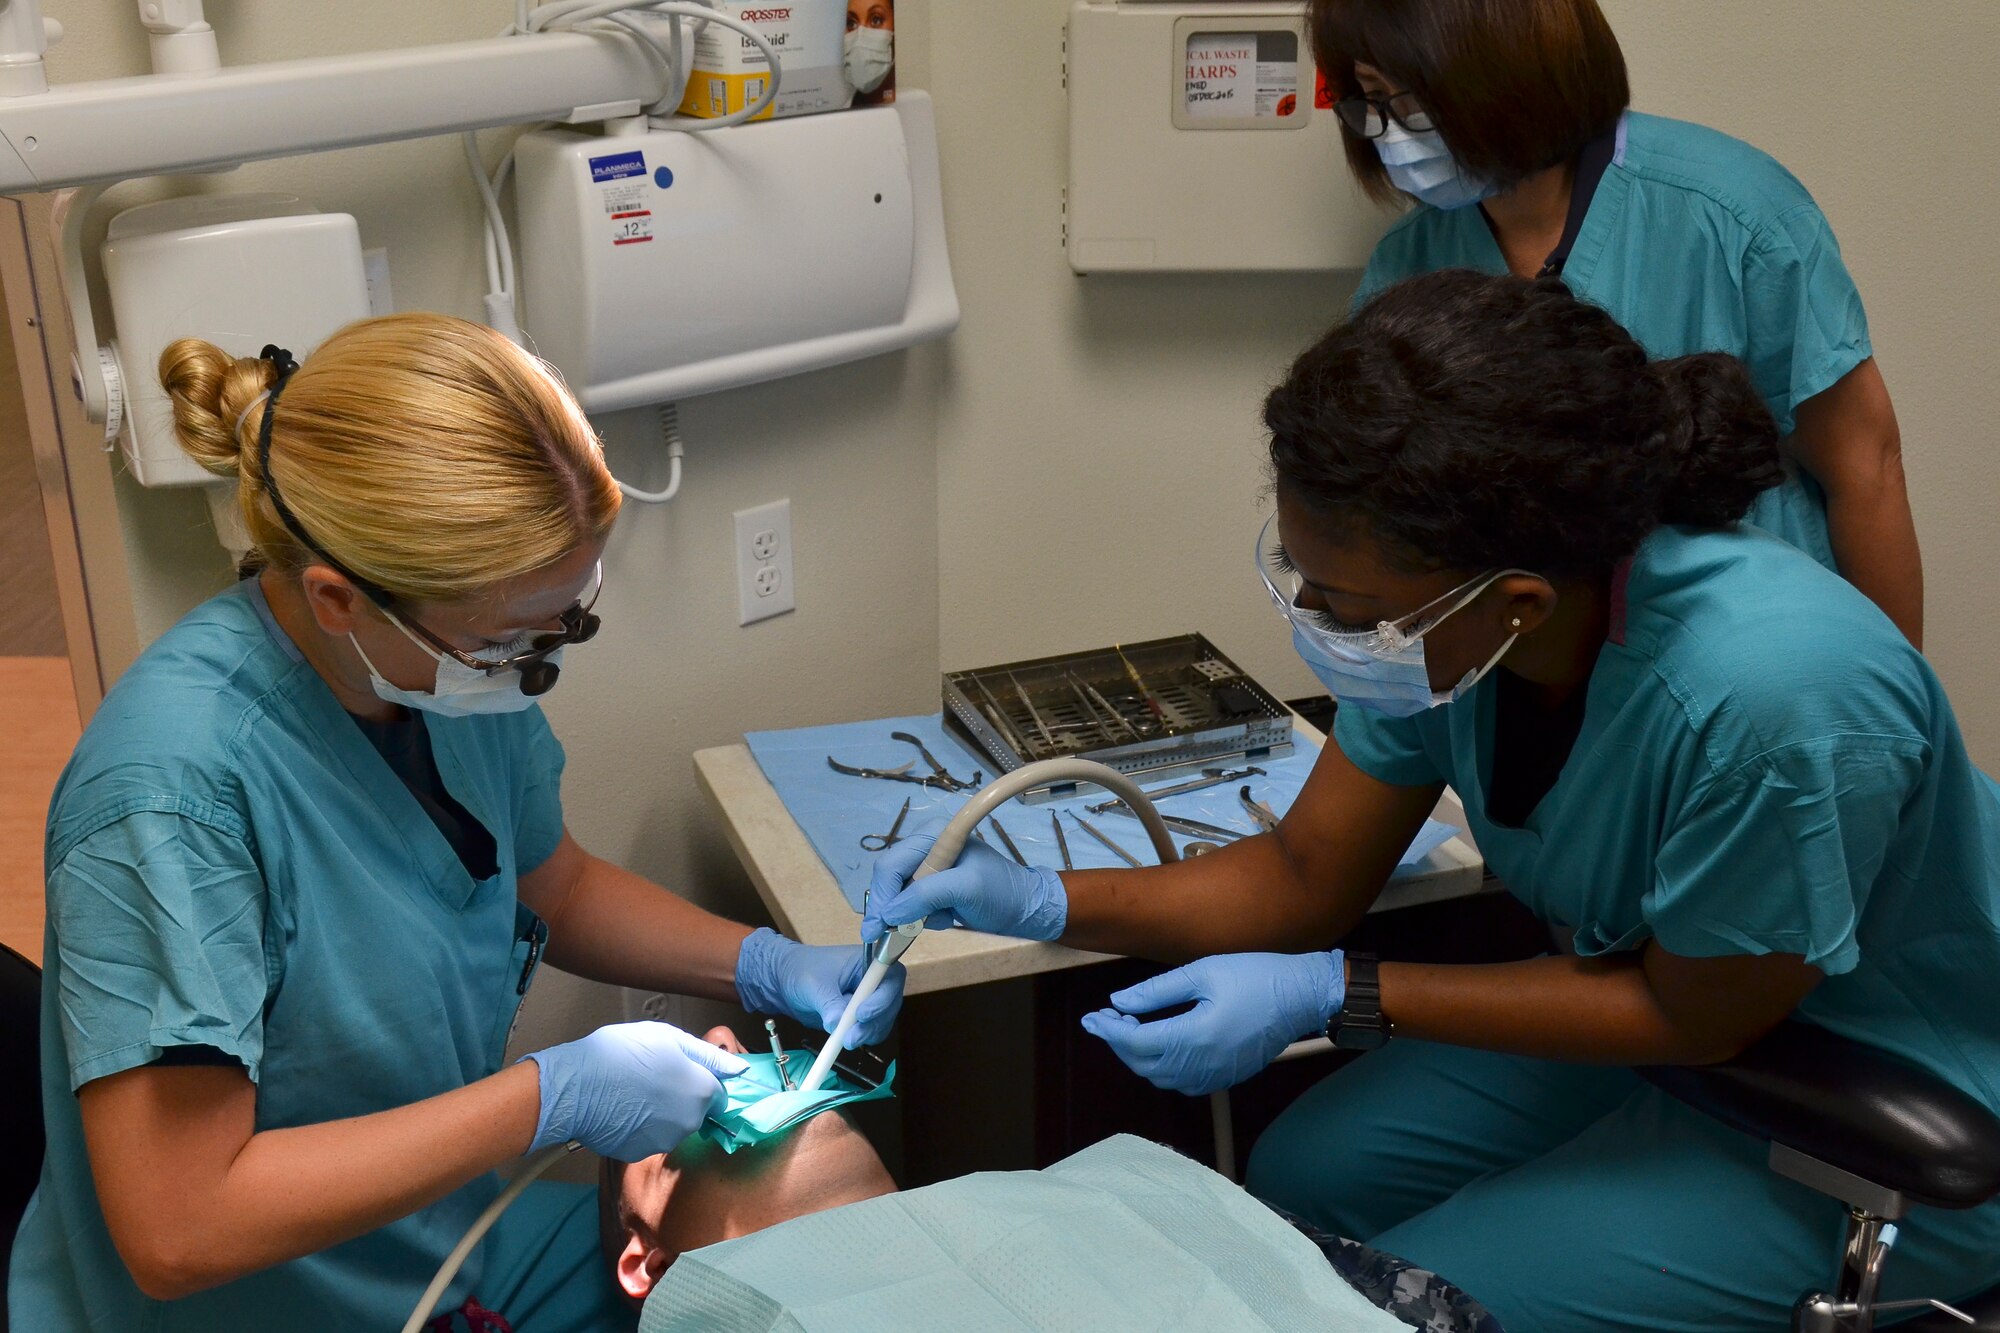 Airman 1st Class Franchestar Witherspoon (right), dental technician, 117th Medical Group assists Lt. Cmdr. Sara Chilcutt, fleet liason officer, Naval Branch Health Clinic, Naval Station San Diego in providing a dental procedure to a patient in the clinic, in San Diego, Calif., June 23, 2016.  The 117 MDG trained with the U.S. Navy at Naval Medical Center San Diego.  The training included Airmen being implemented in real world U.S. Naval operations.  (U.S. Air National Guard photo by Staff Sgt. Jeremy Farson/Released)   